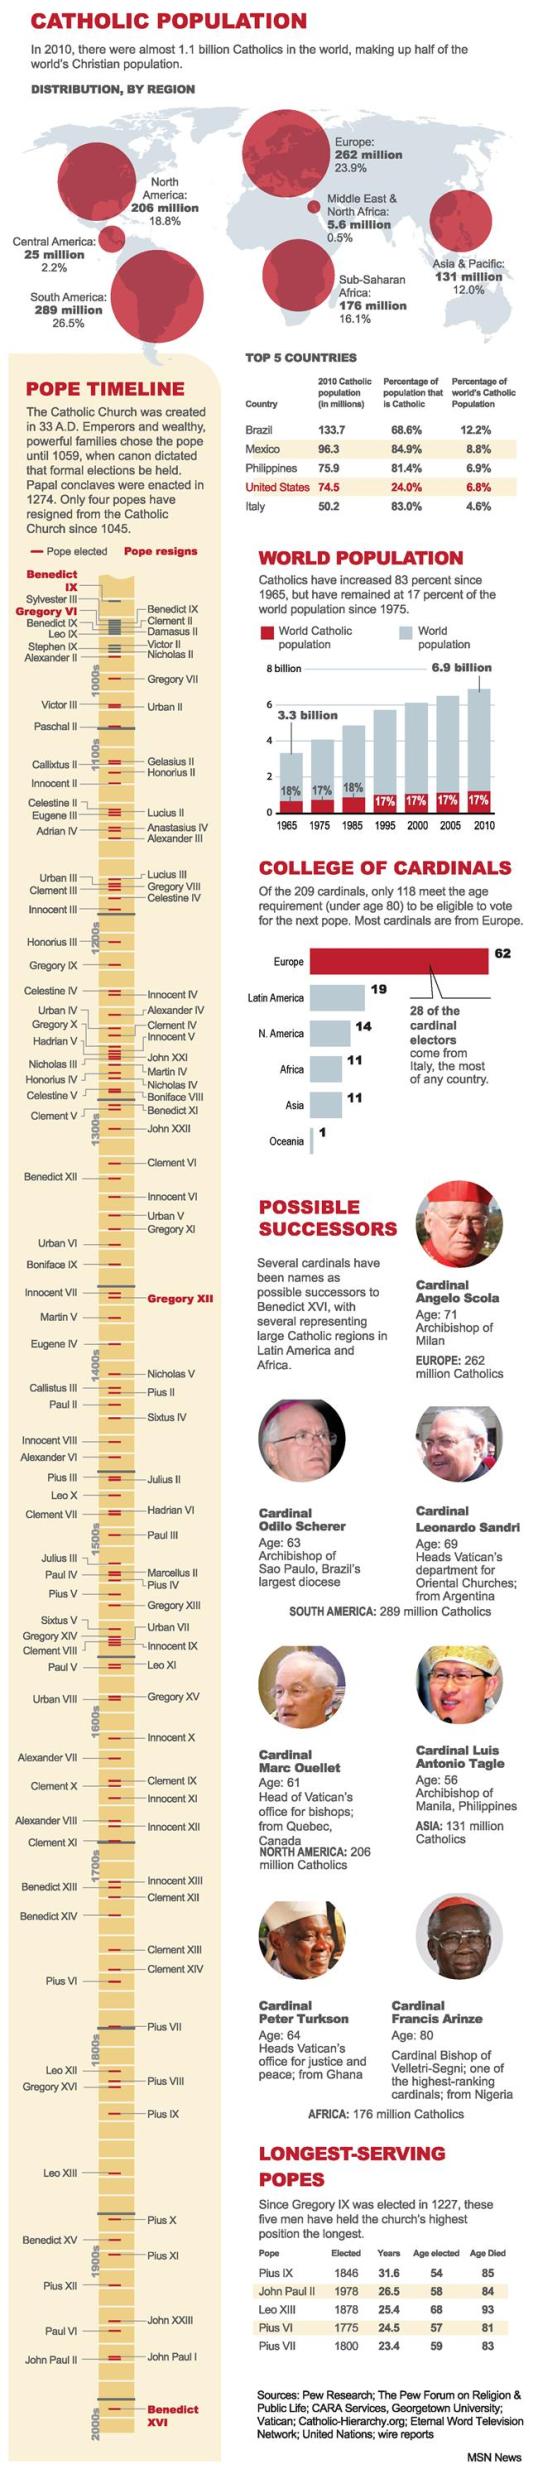 Where Will the Next Pope Come From Infographic Catholic